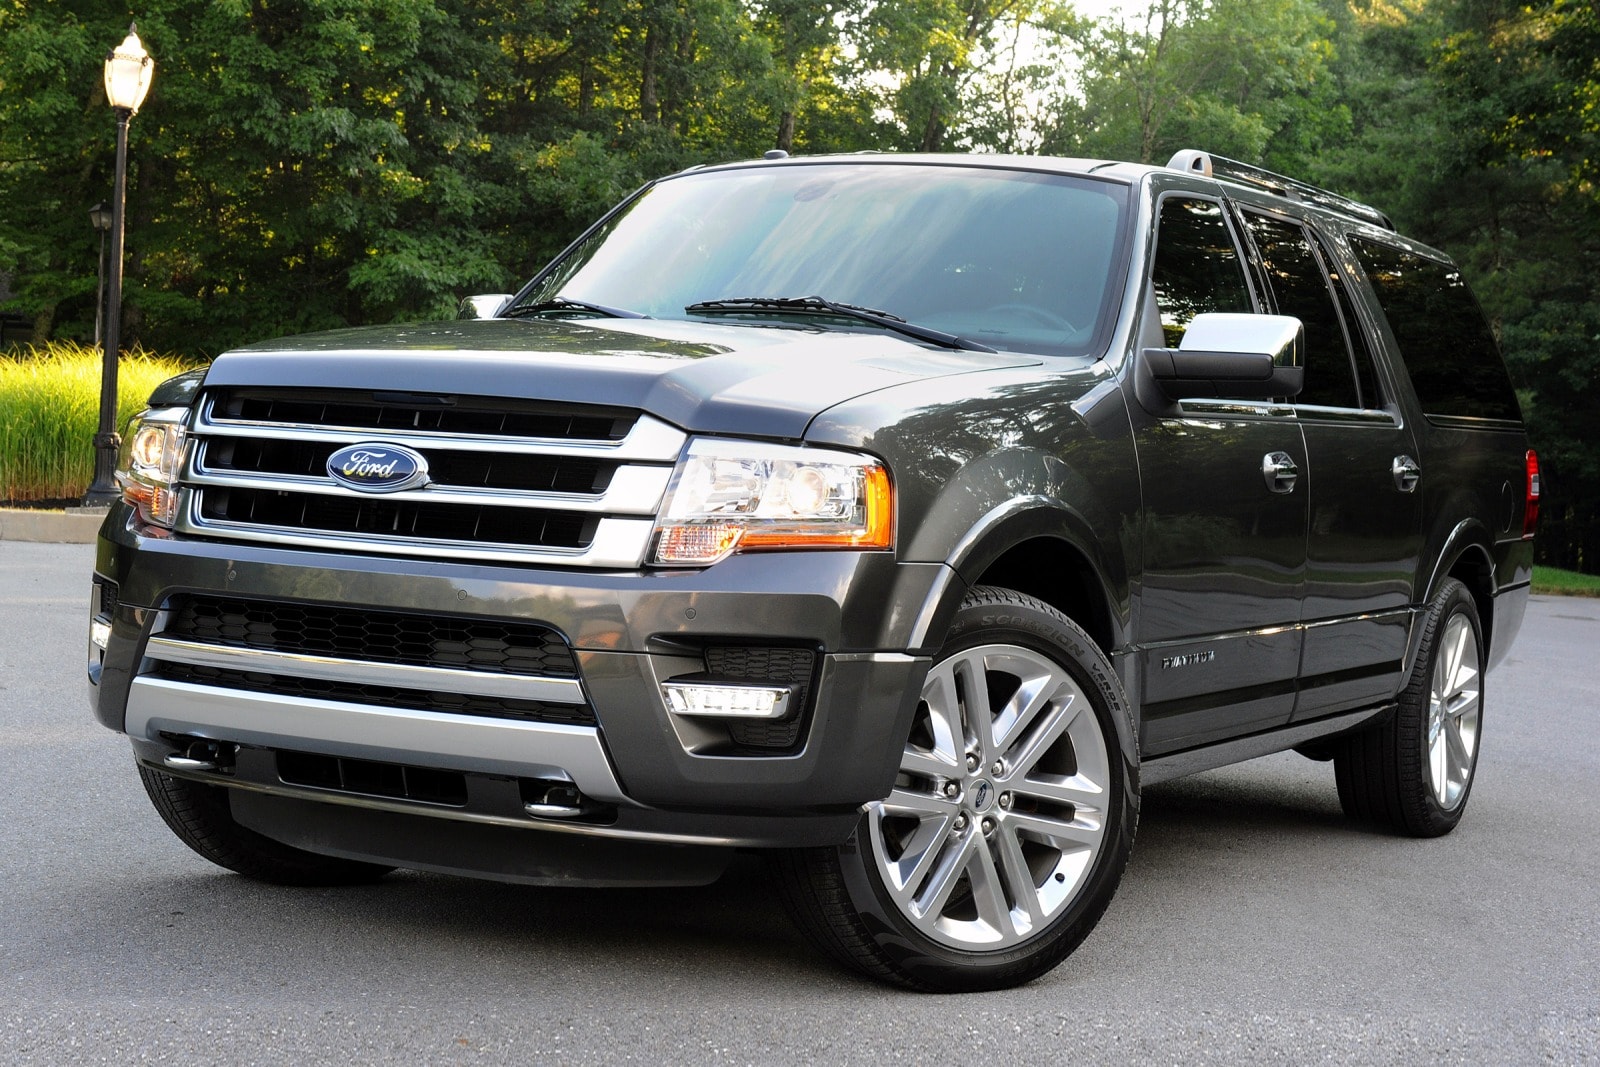 2016 Ford Expedition Review & Ratings | Edmunds